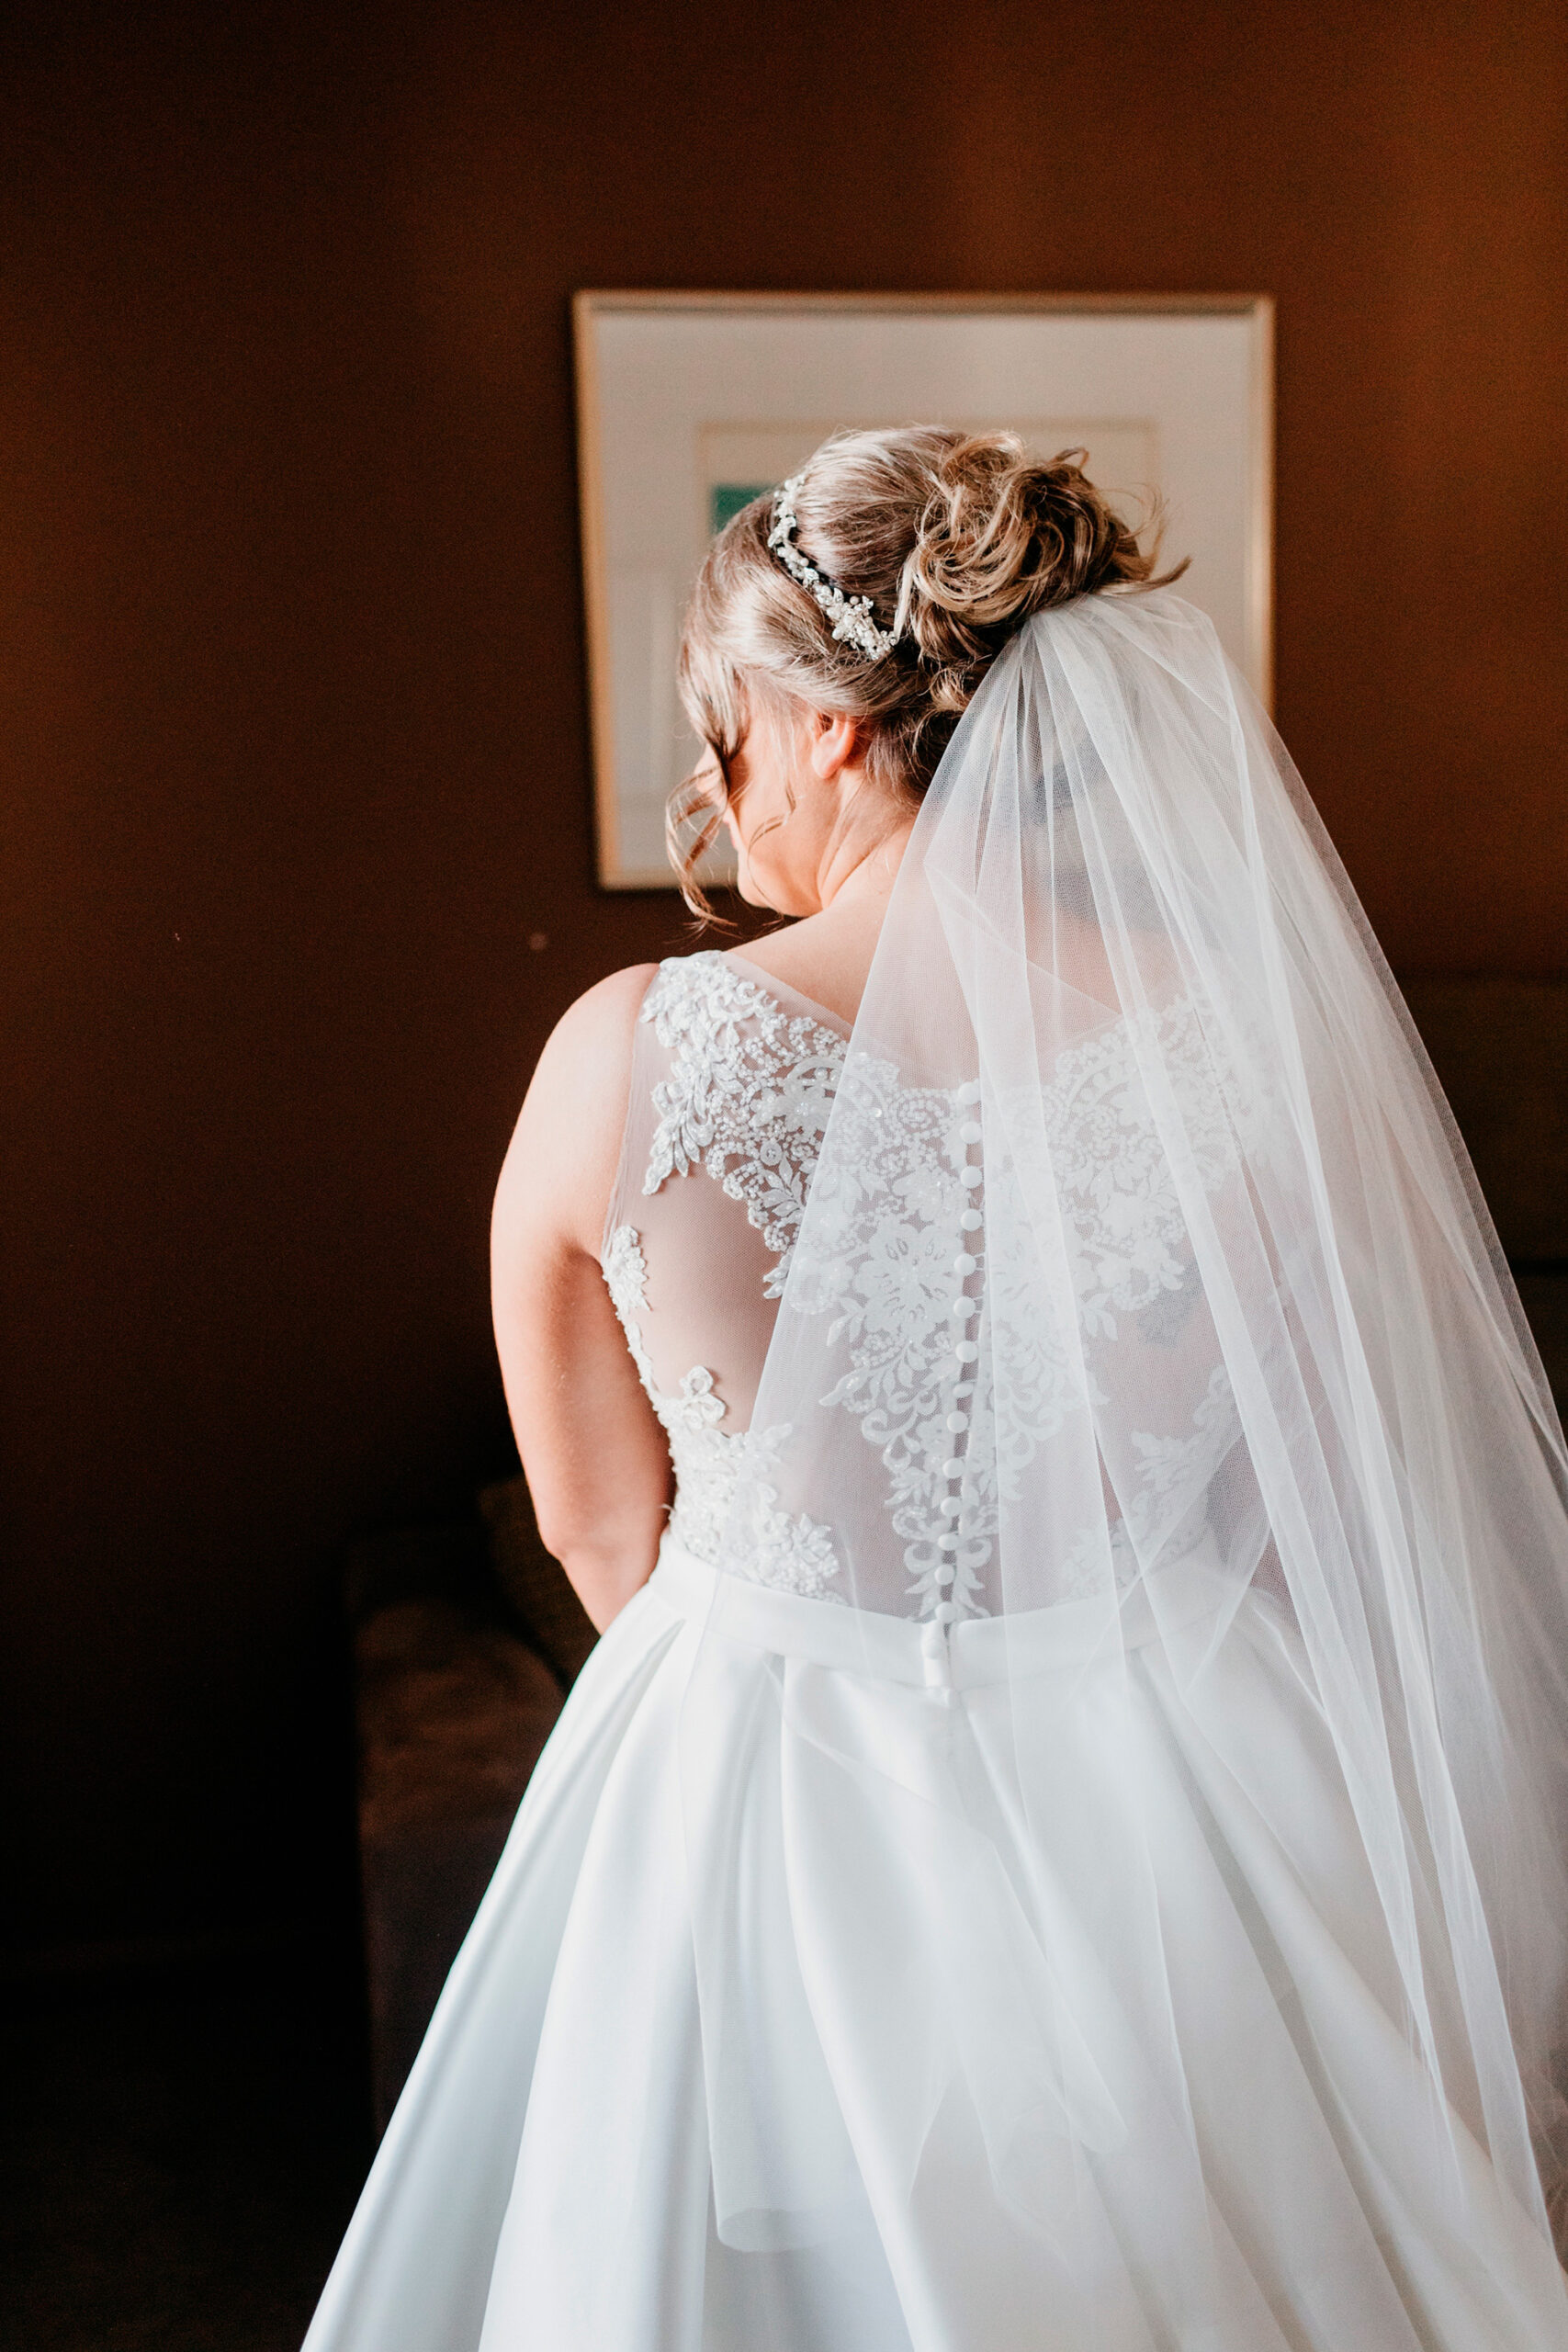 Melanie Jacob Modern Classic Wedding Perfect Moment Photography SBS 009 scaled